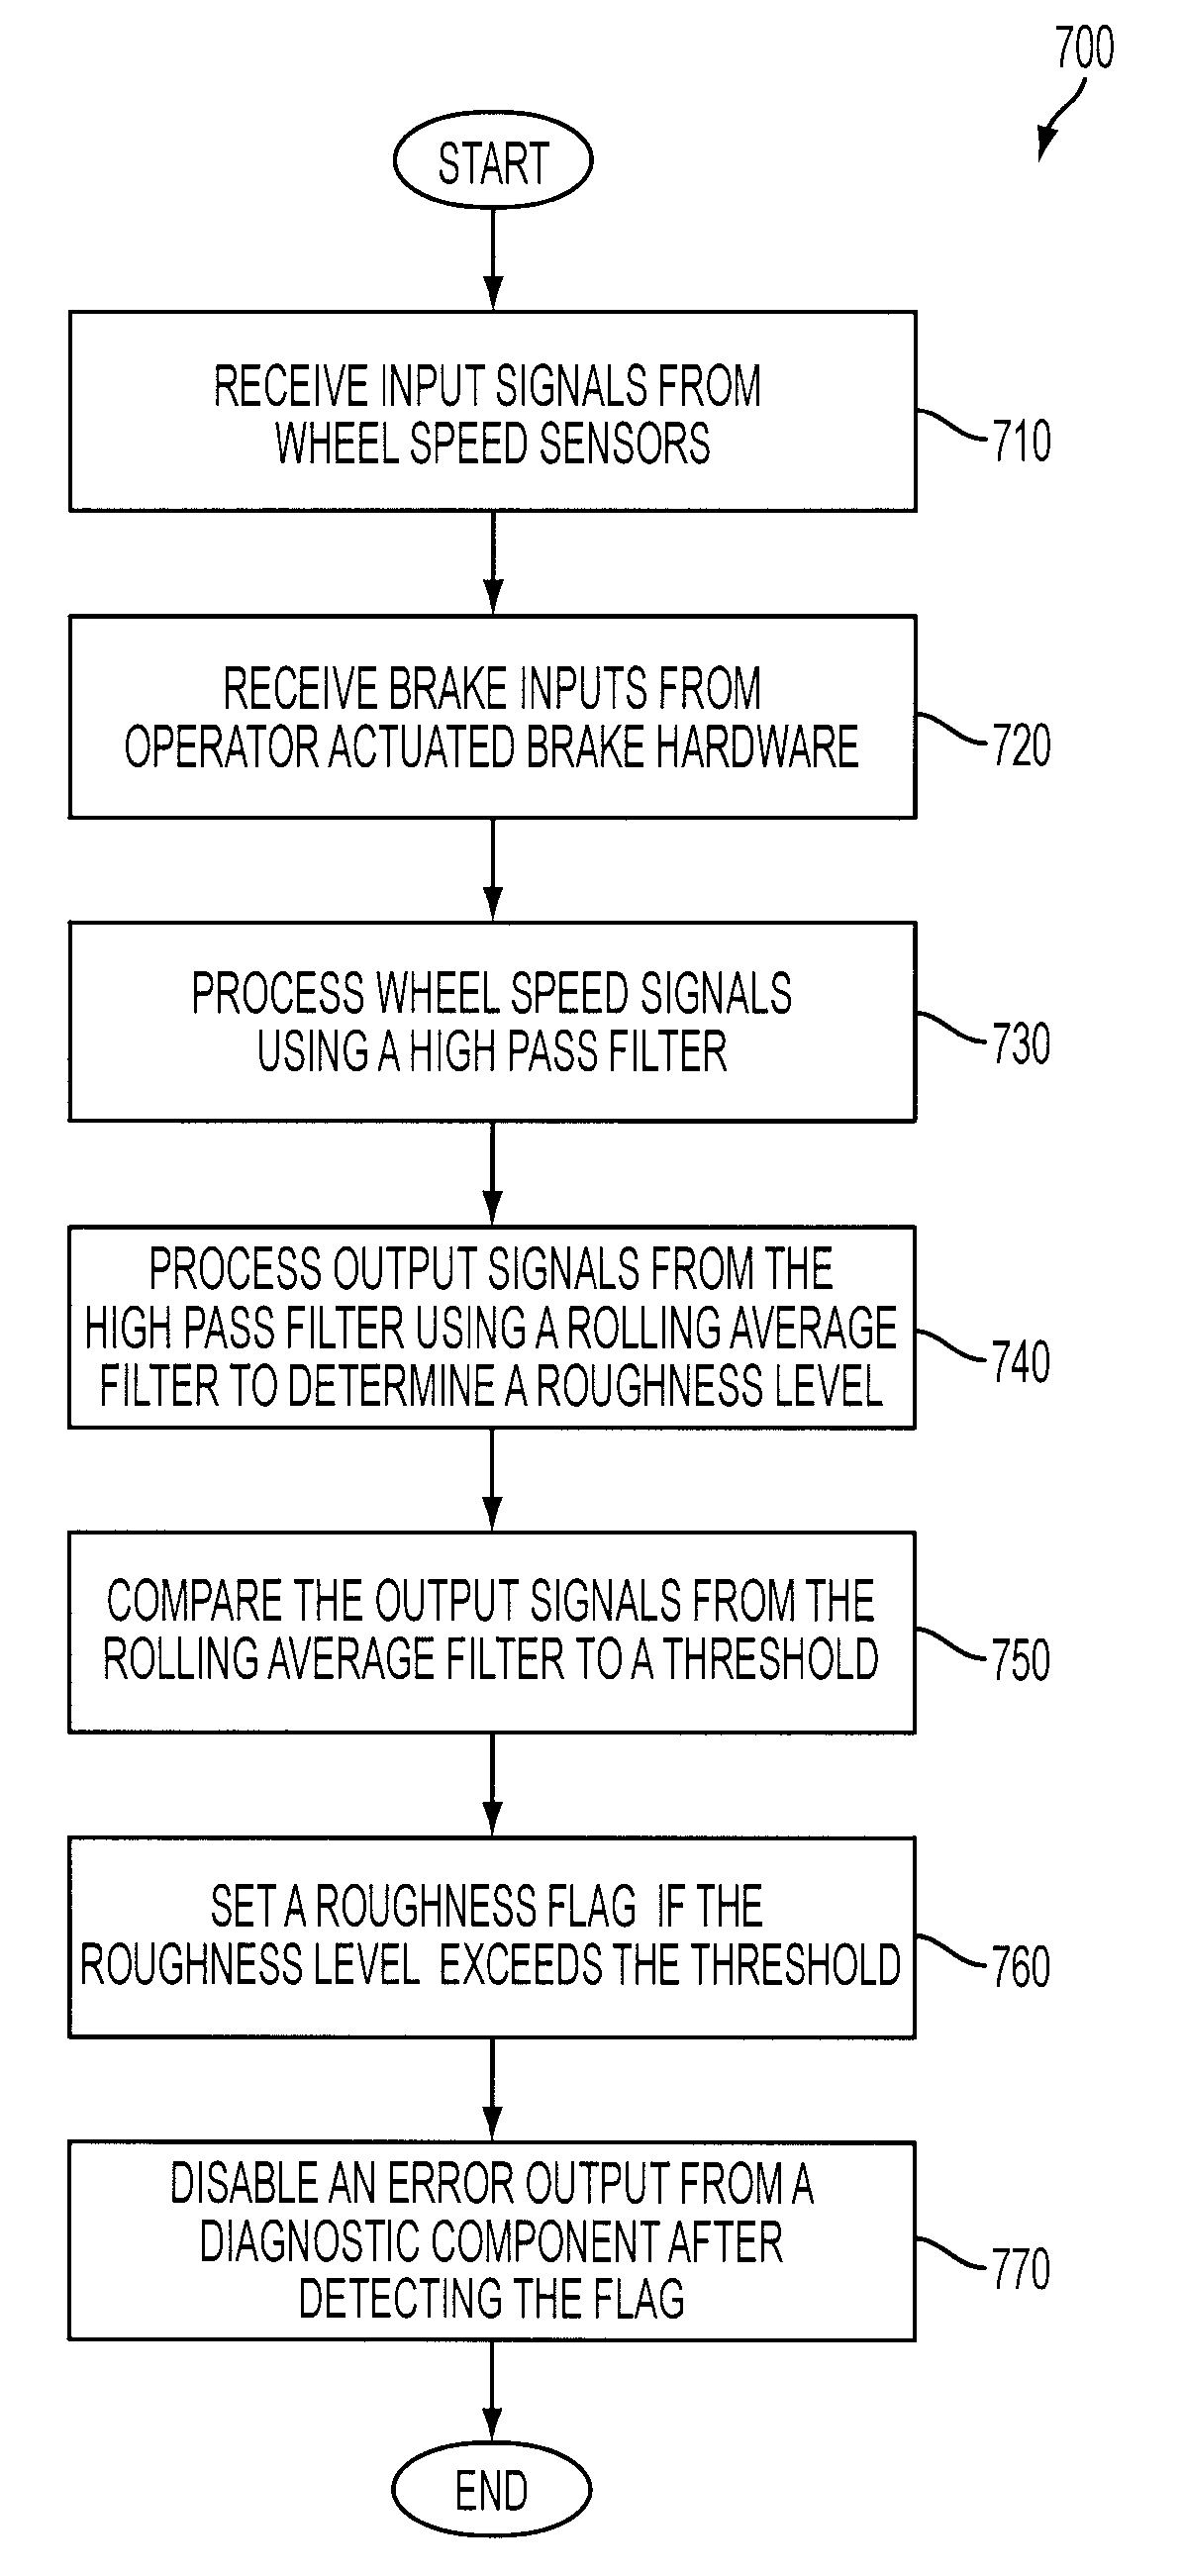 Rough road detection system used in an on-board diagnostic system